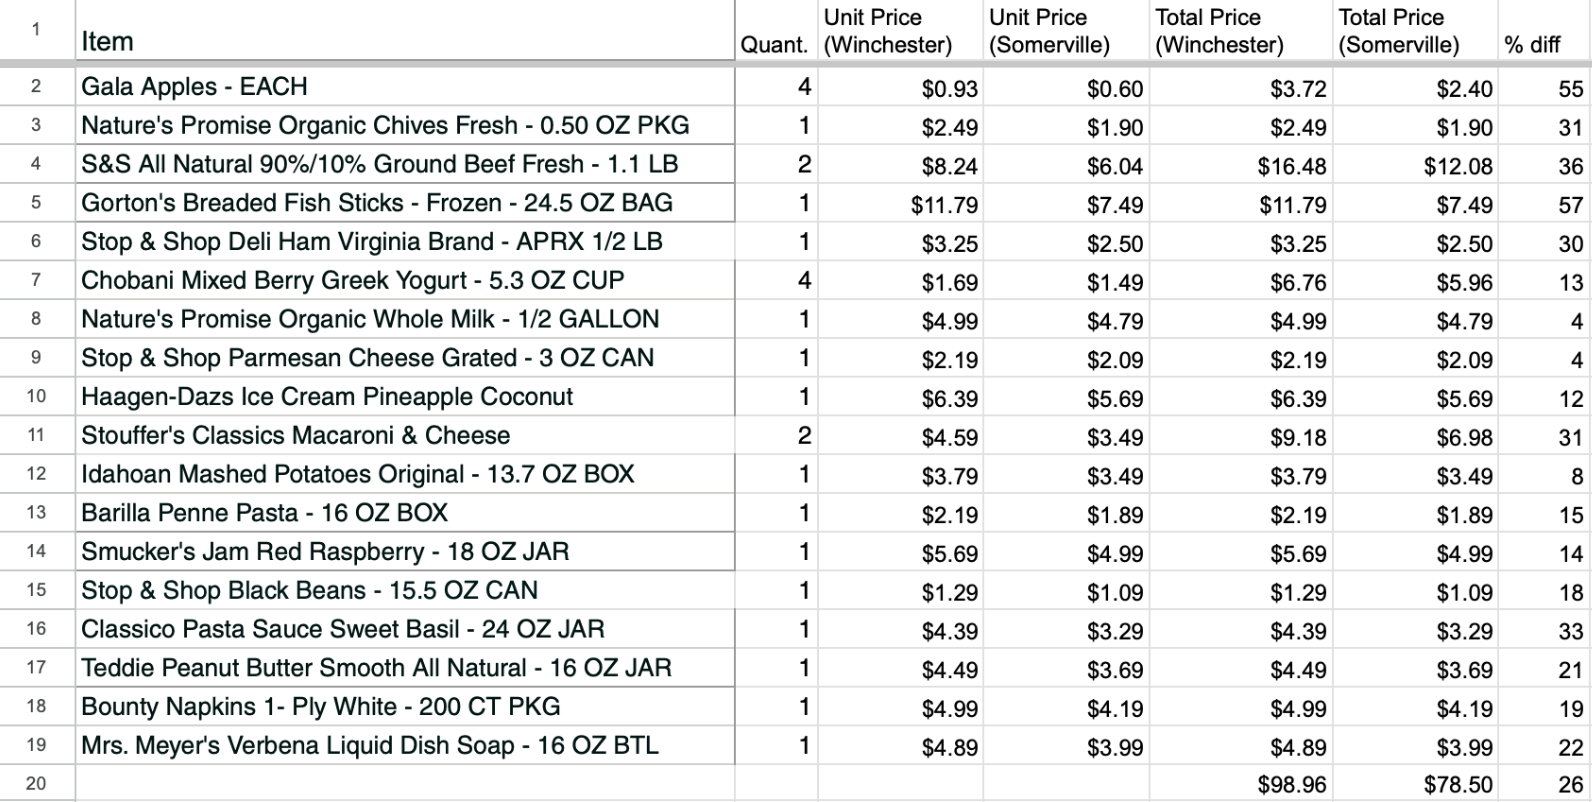 An image of a spreadsheet showing the price of 18 items at two stores, with a difference of $26.06